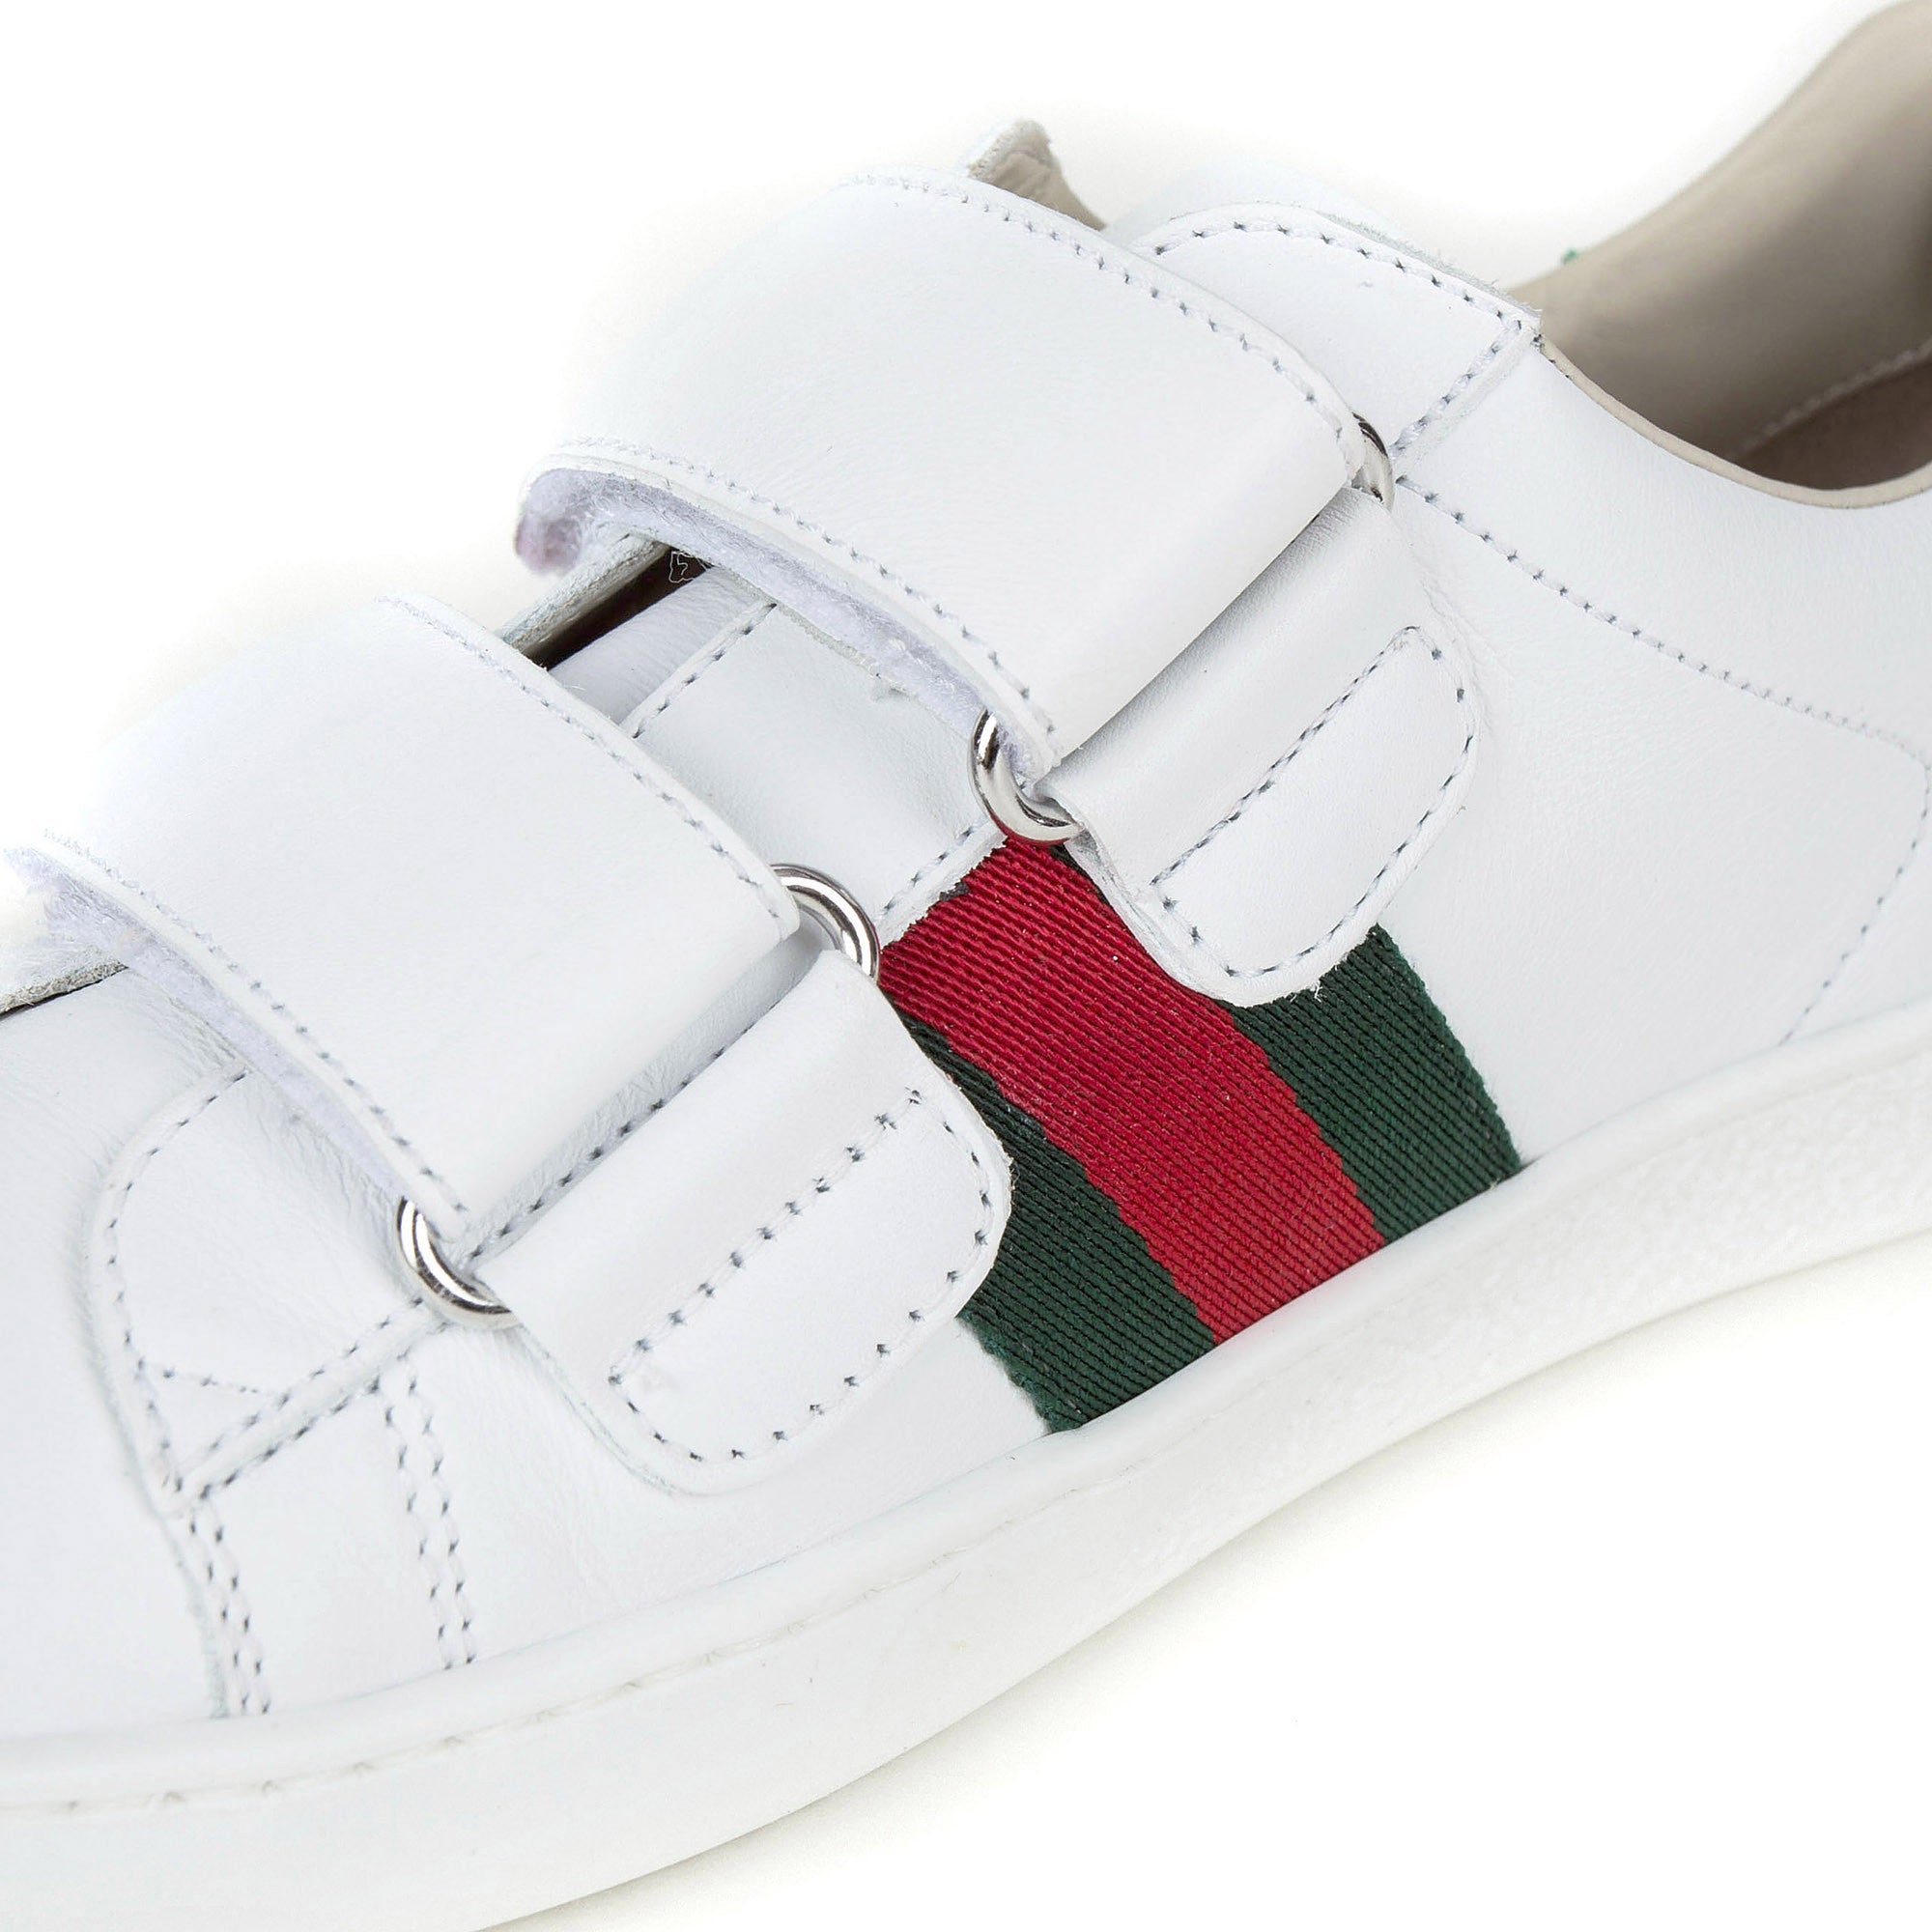 Boys & Girls White Leather Trainers